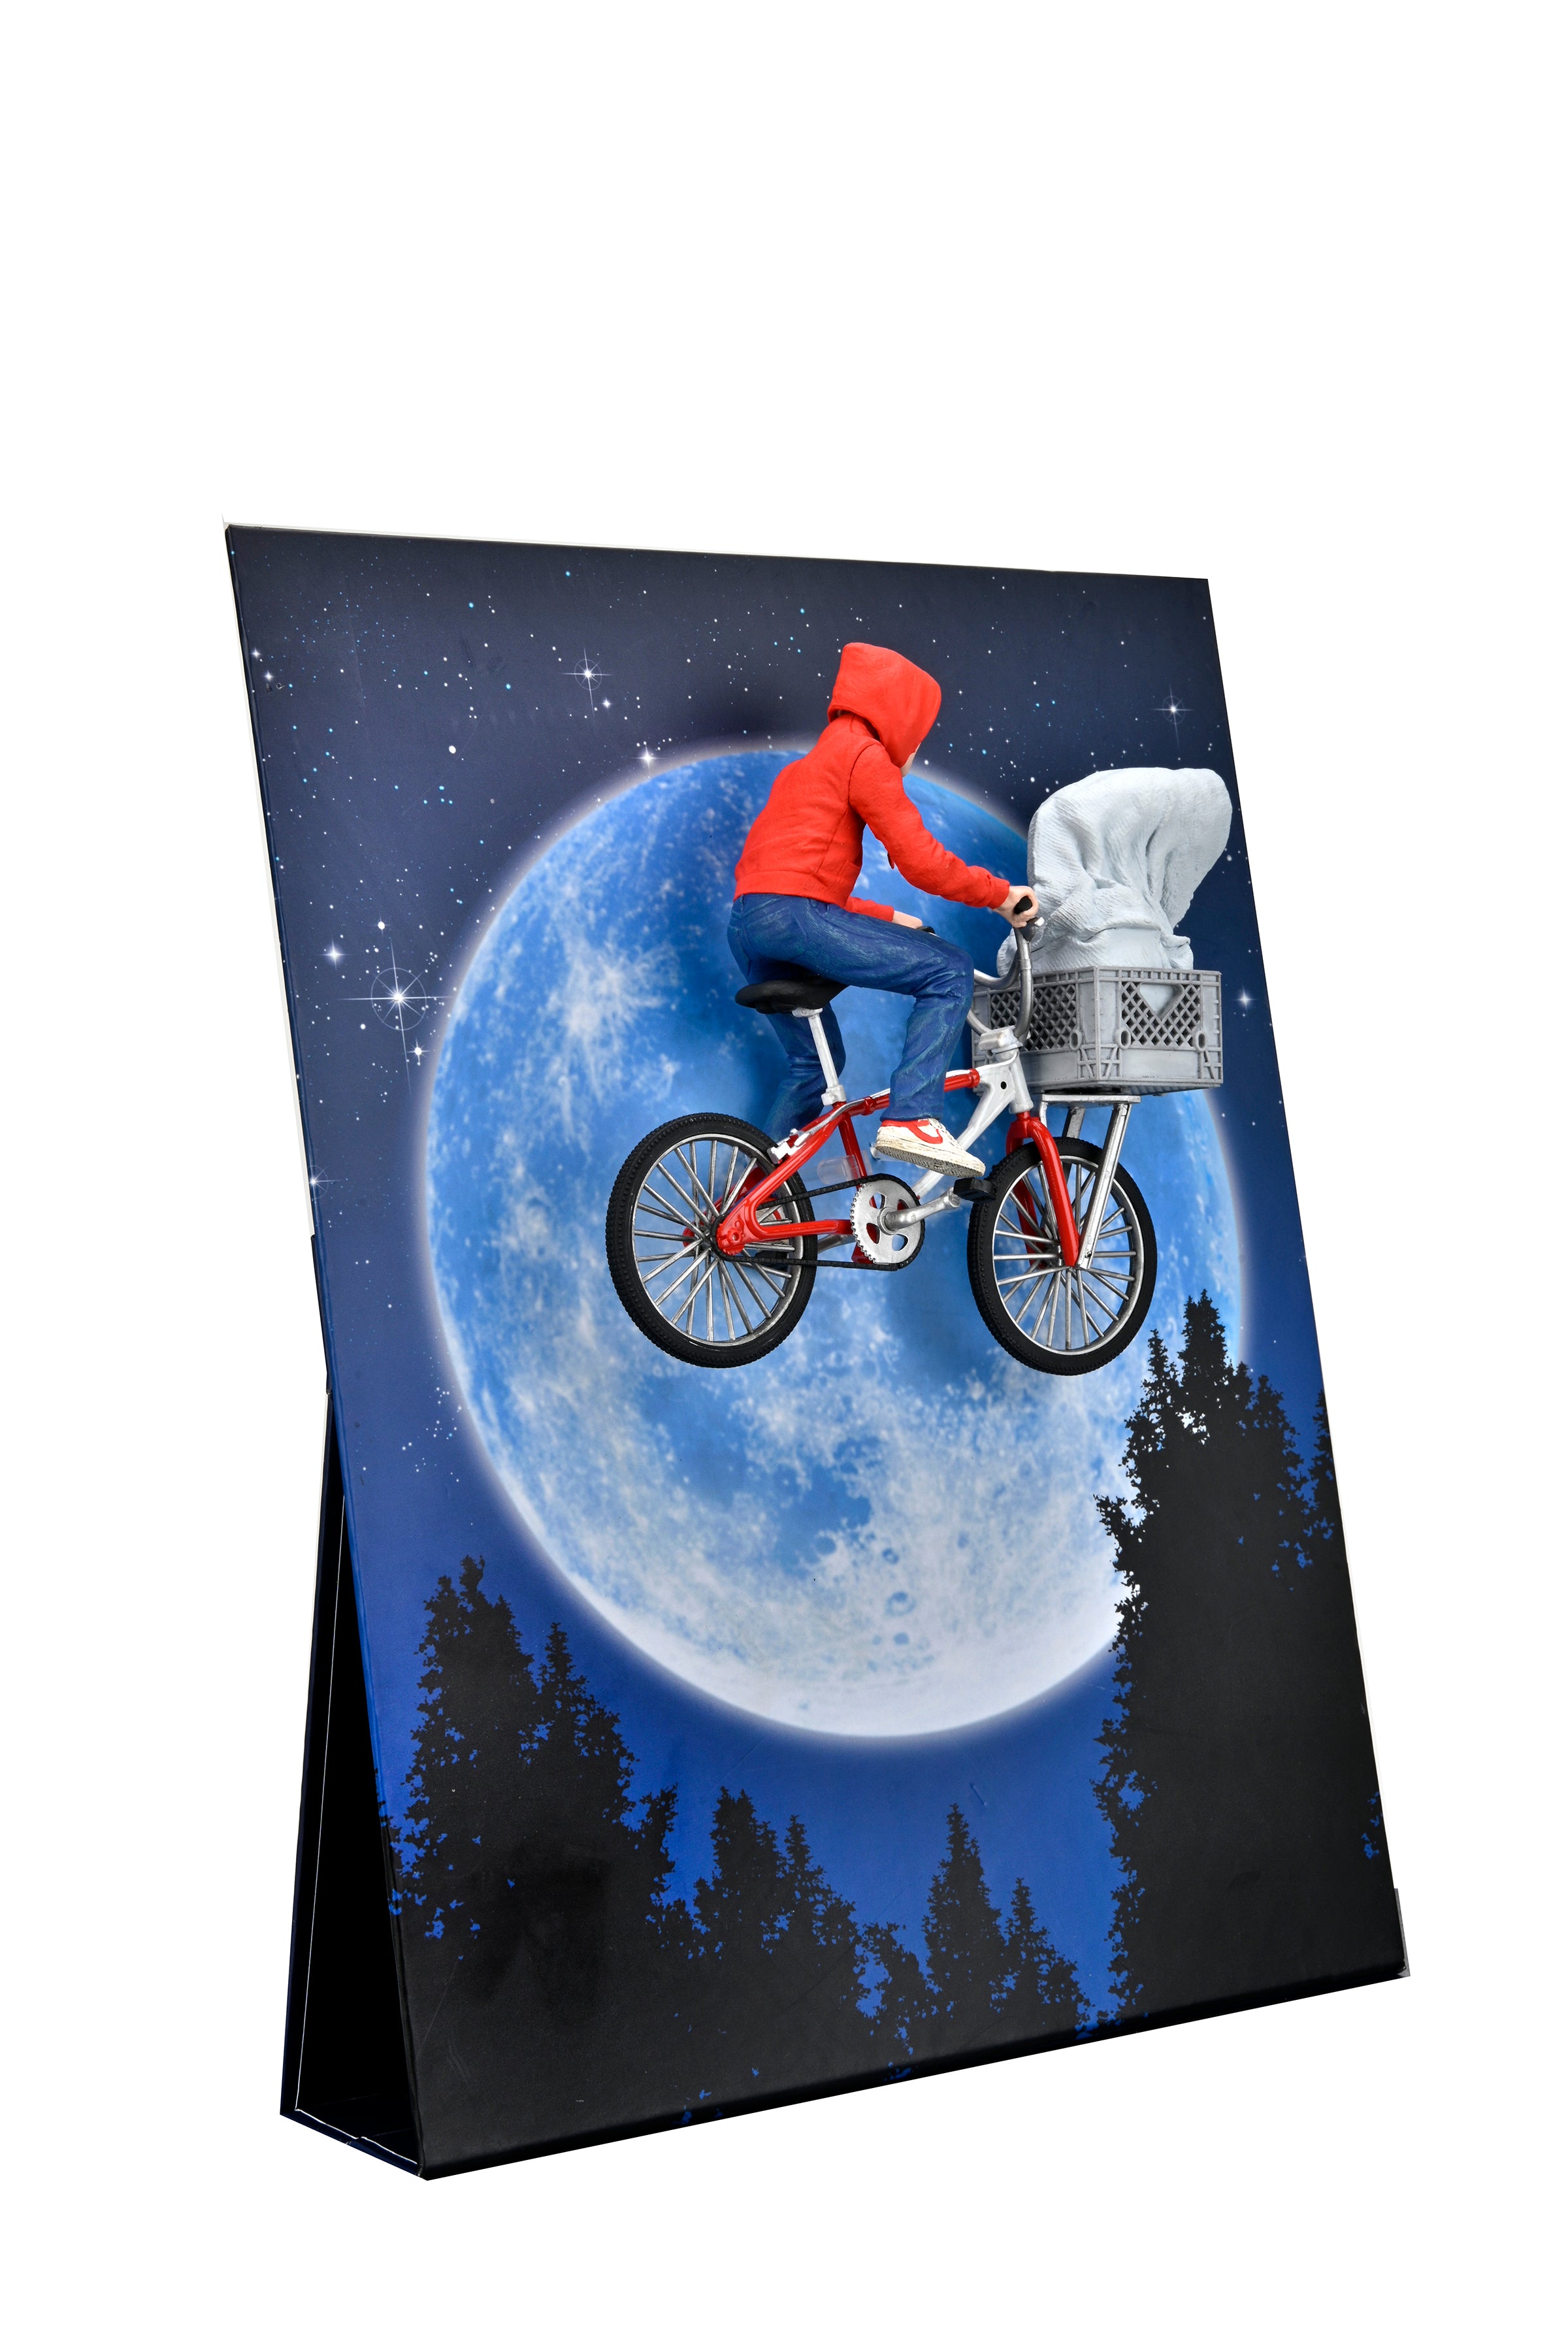 E.T. The Extra-Terrestrial - Elliott & E.T. on Bicycle (40th Anniversary)  7